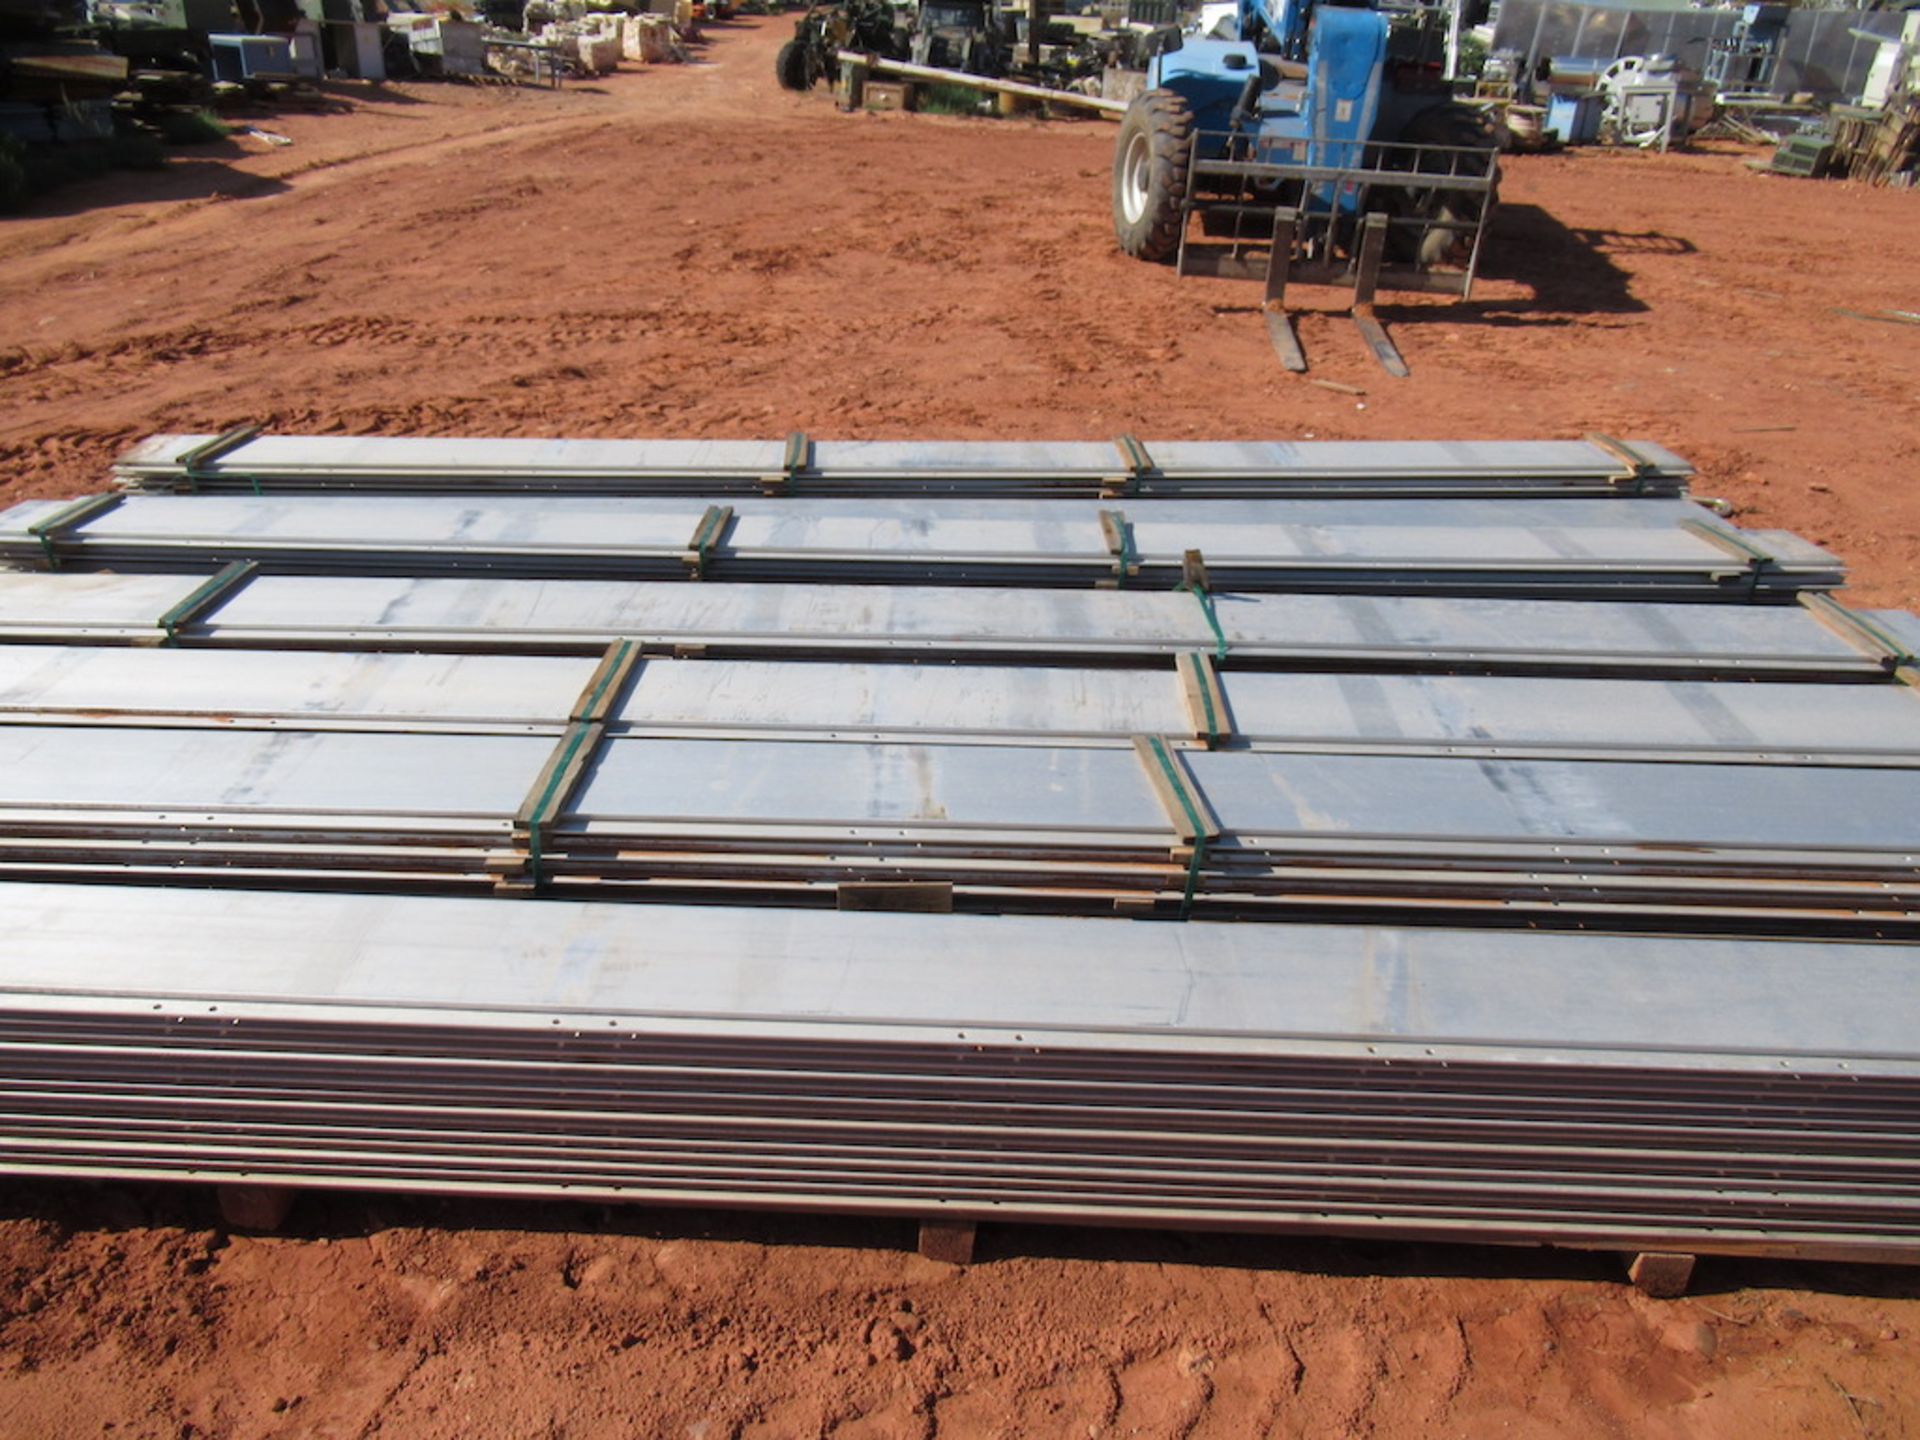 Lot of 74 Aluminum Planks Decking, 74, 6660 lbs, 192"x14"x1.5" (each), 192"x14"x26" (pallet), ISLE 2 - Image 5 of 5